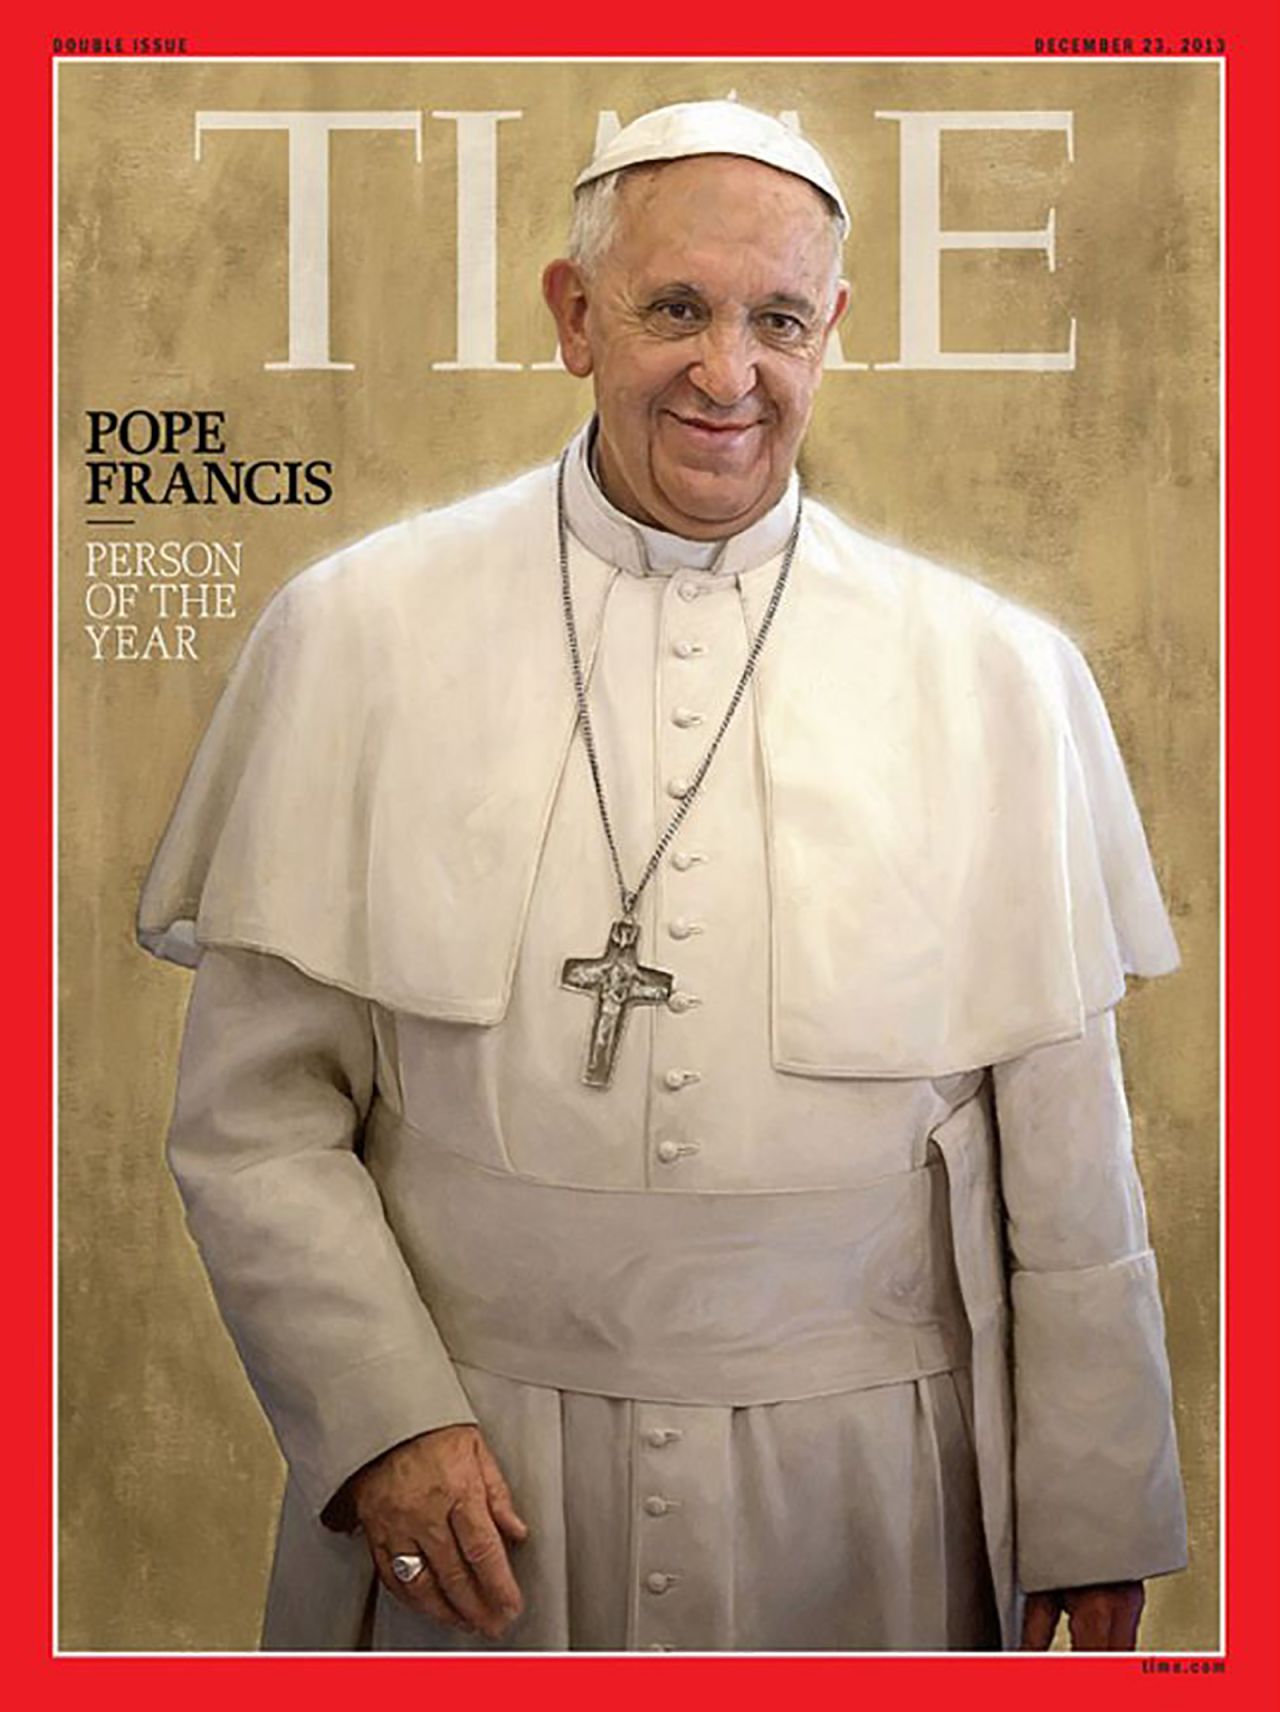 Francis was named Time magazine's Person of the Year in 2013.